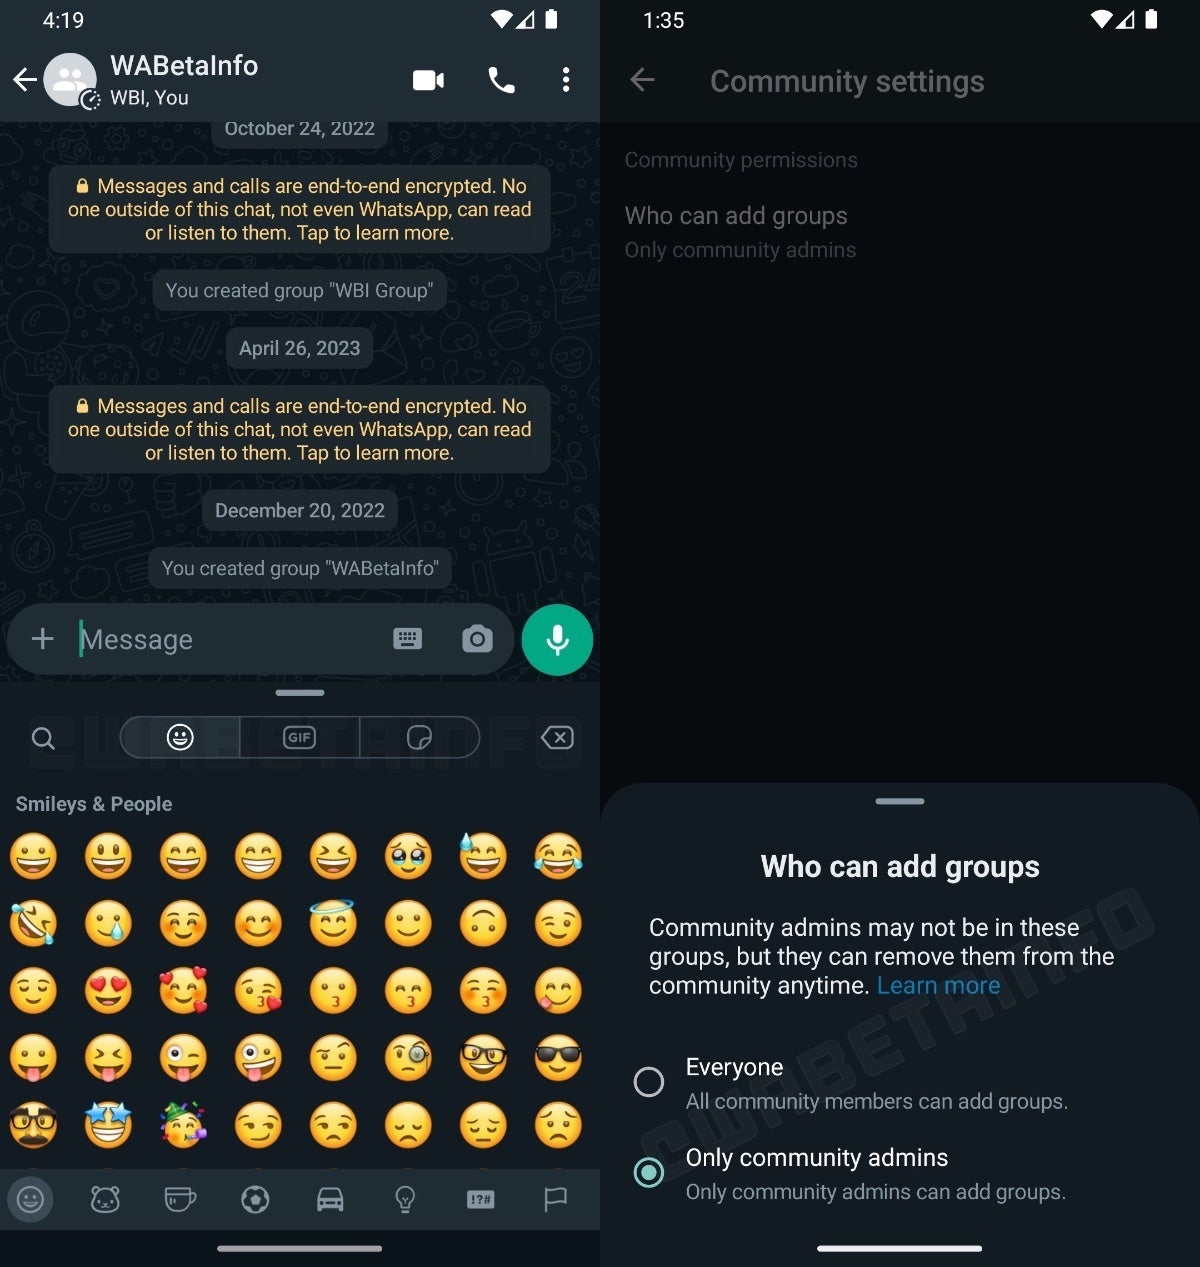 Image Credit -&nbsp;WABetaInfo - WhatsApp beta for Android begins rollout of redesigned emoji keyboard